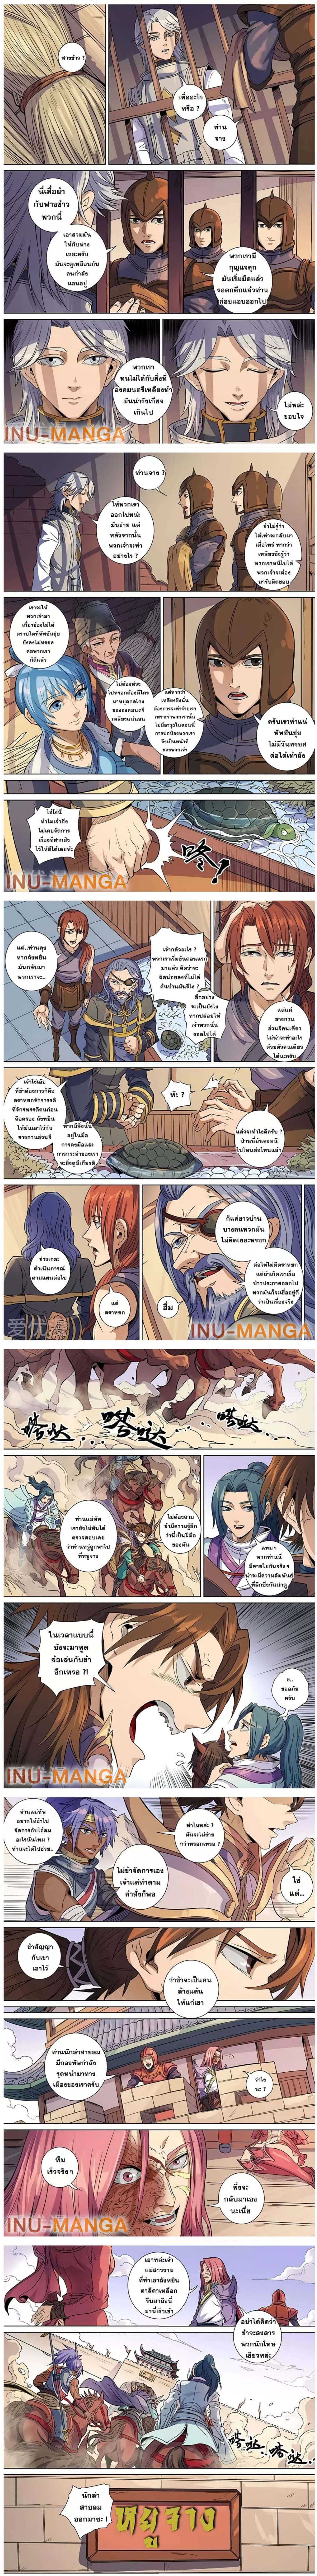 Tangyan in The Other World 138 (5)